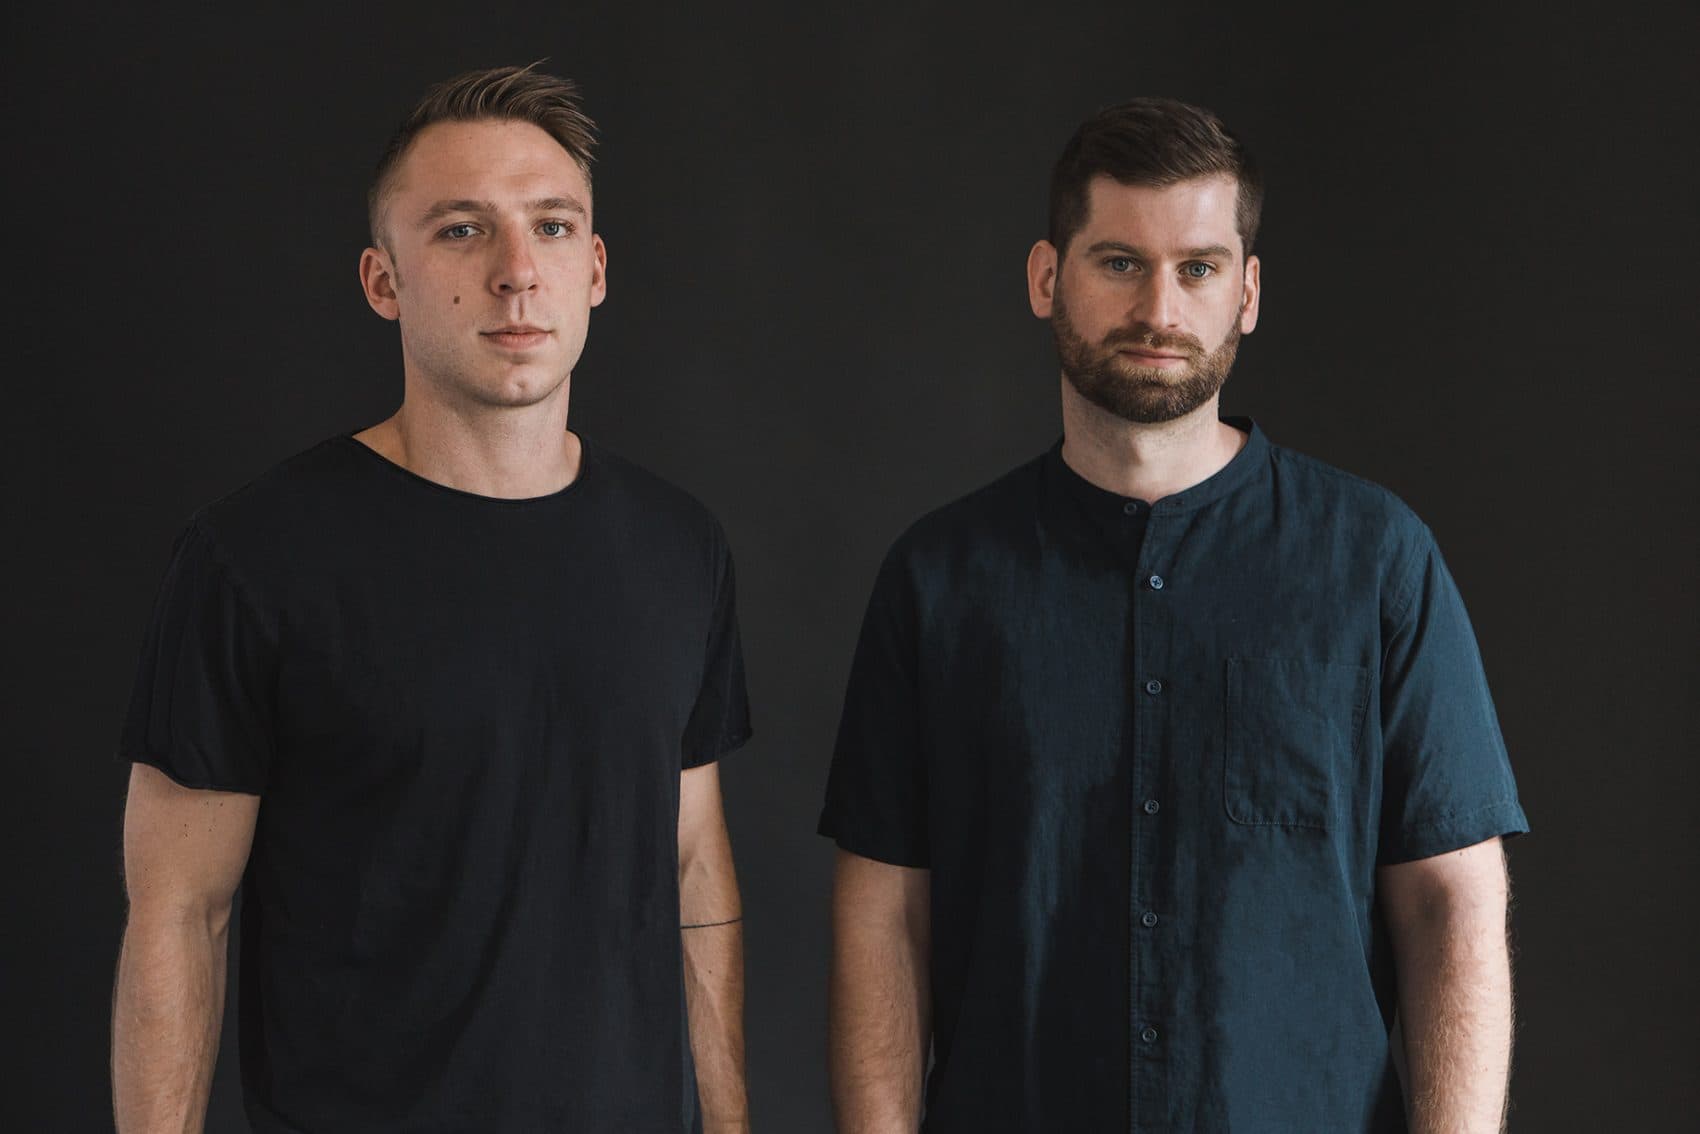 Clayton Knight (left) and Harrison Mills, of ODESZA. (Courtesy Avi Loud)